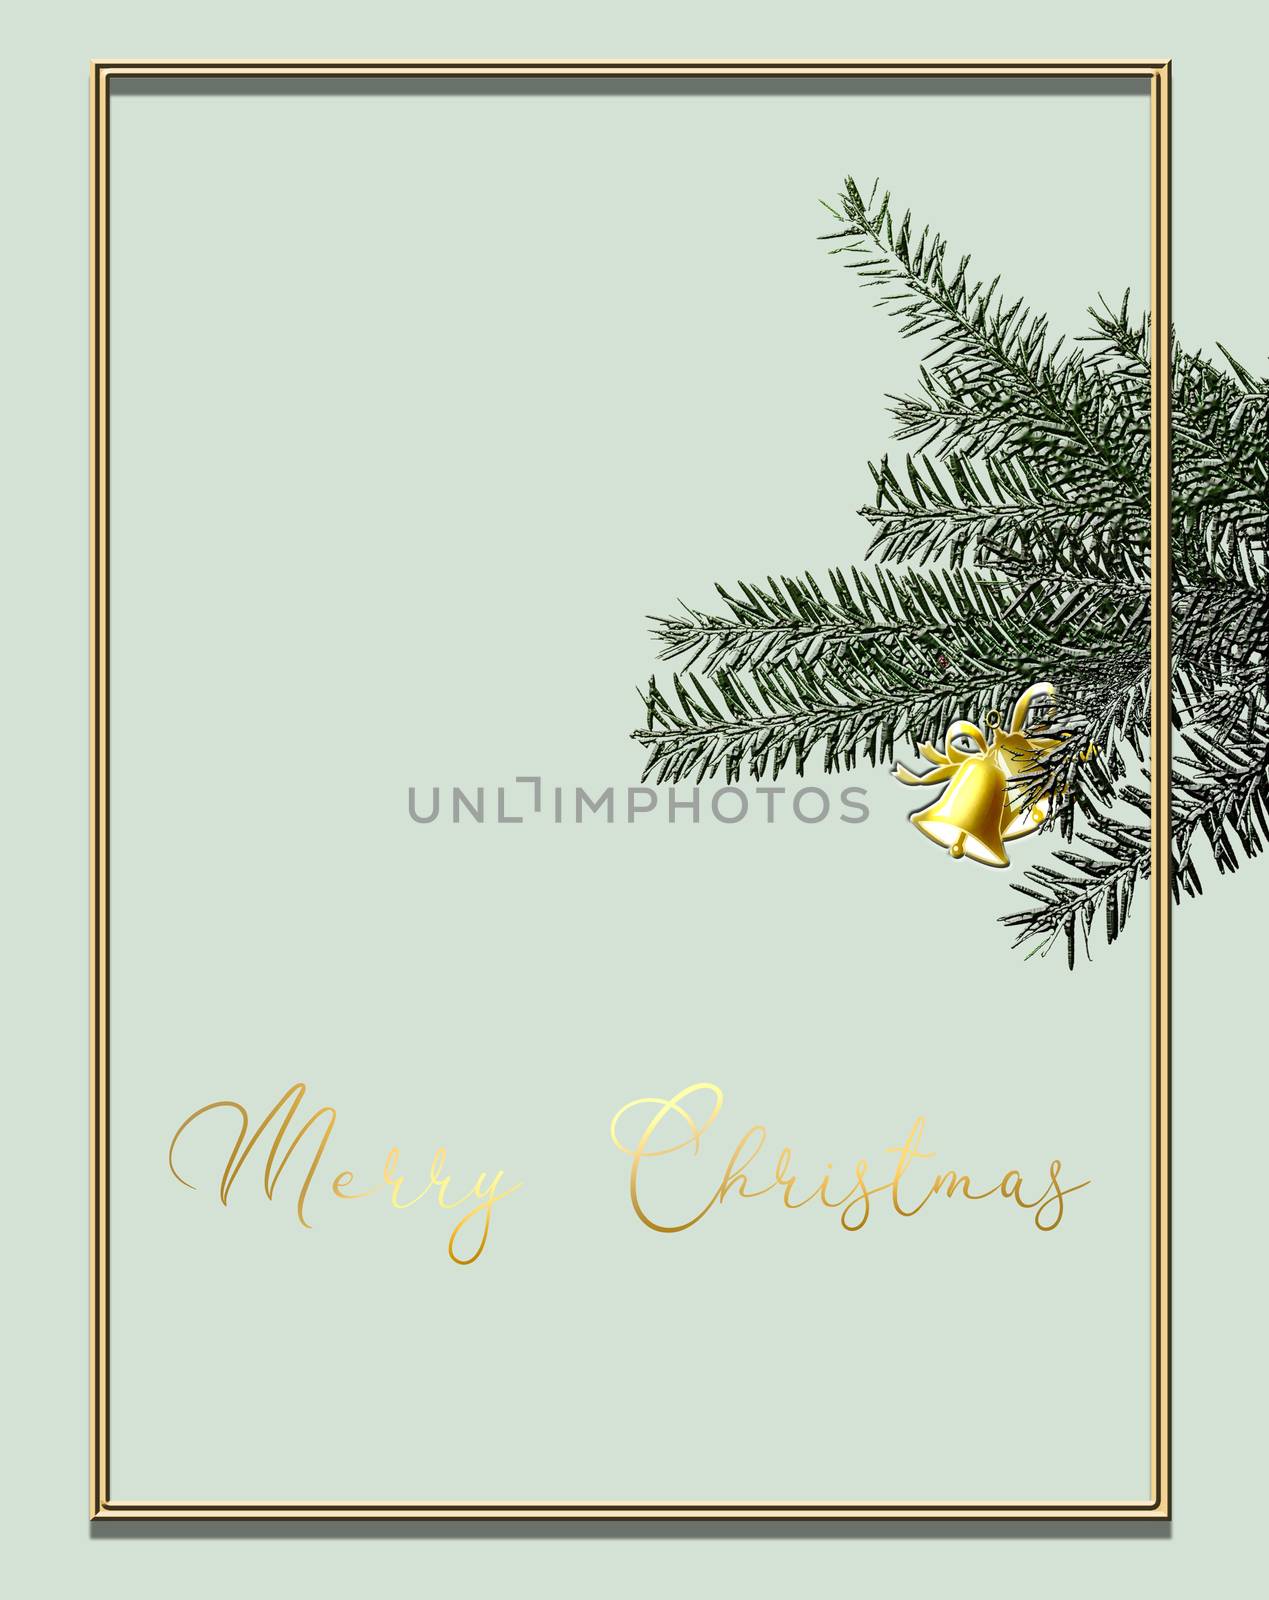 Minimalist Christmas design with gold bell and fir branches on pastel green background. Gold text Merry Christmas. 3D illustration